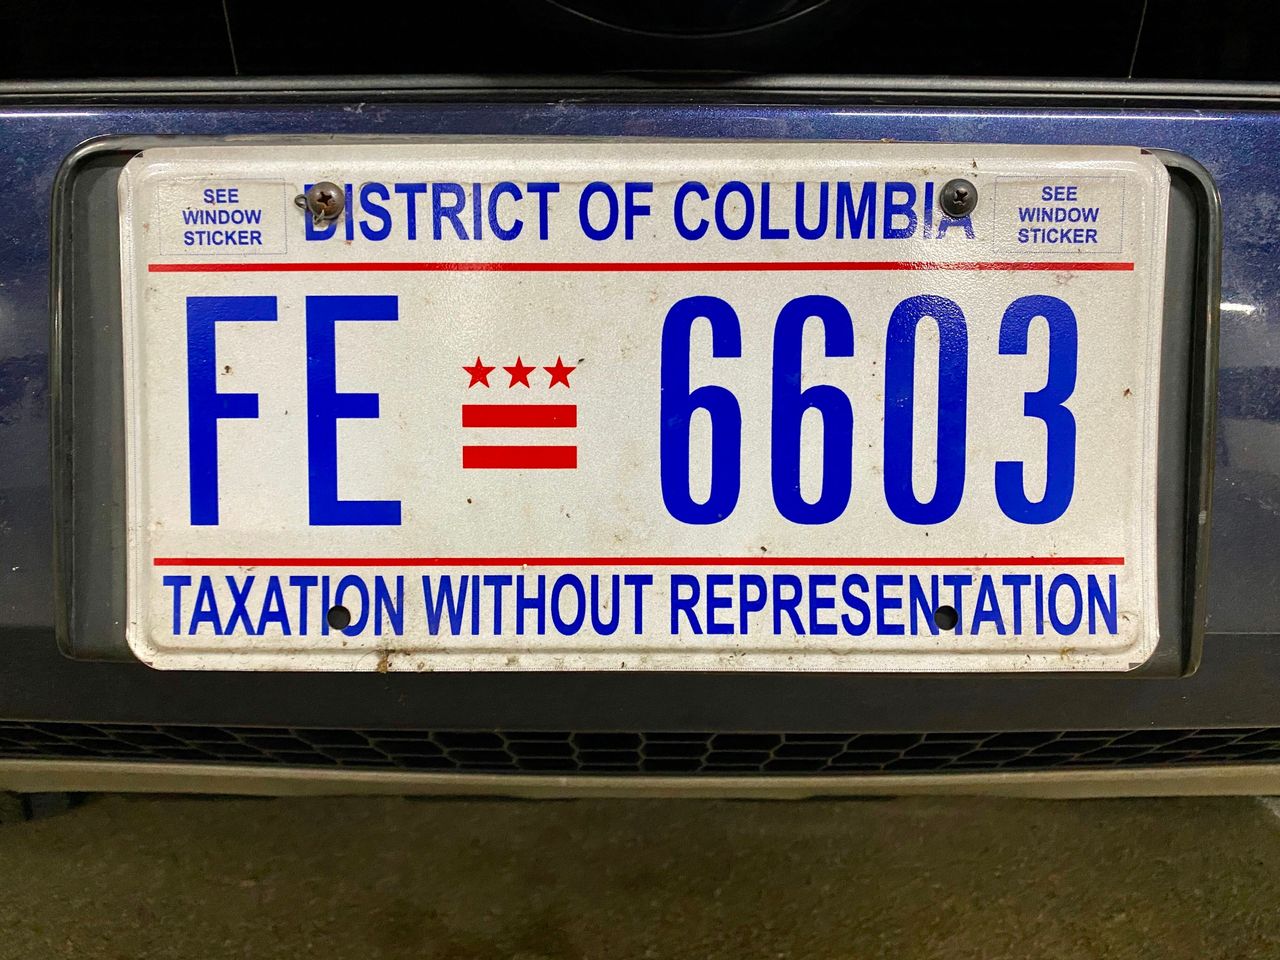 A D.C. license plates bear the phrase "Taxation Without Representation," repurposing the popular rallying cry of the American Revolution to note that D.C. residents pay more in federal income taxes than residents of 22 states, but do not enjoy the representation that comes with statehood.